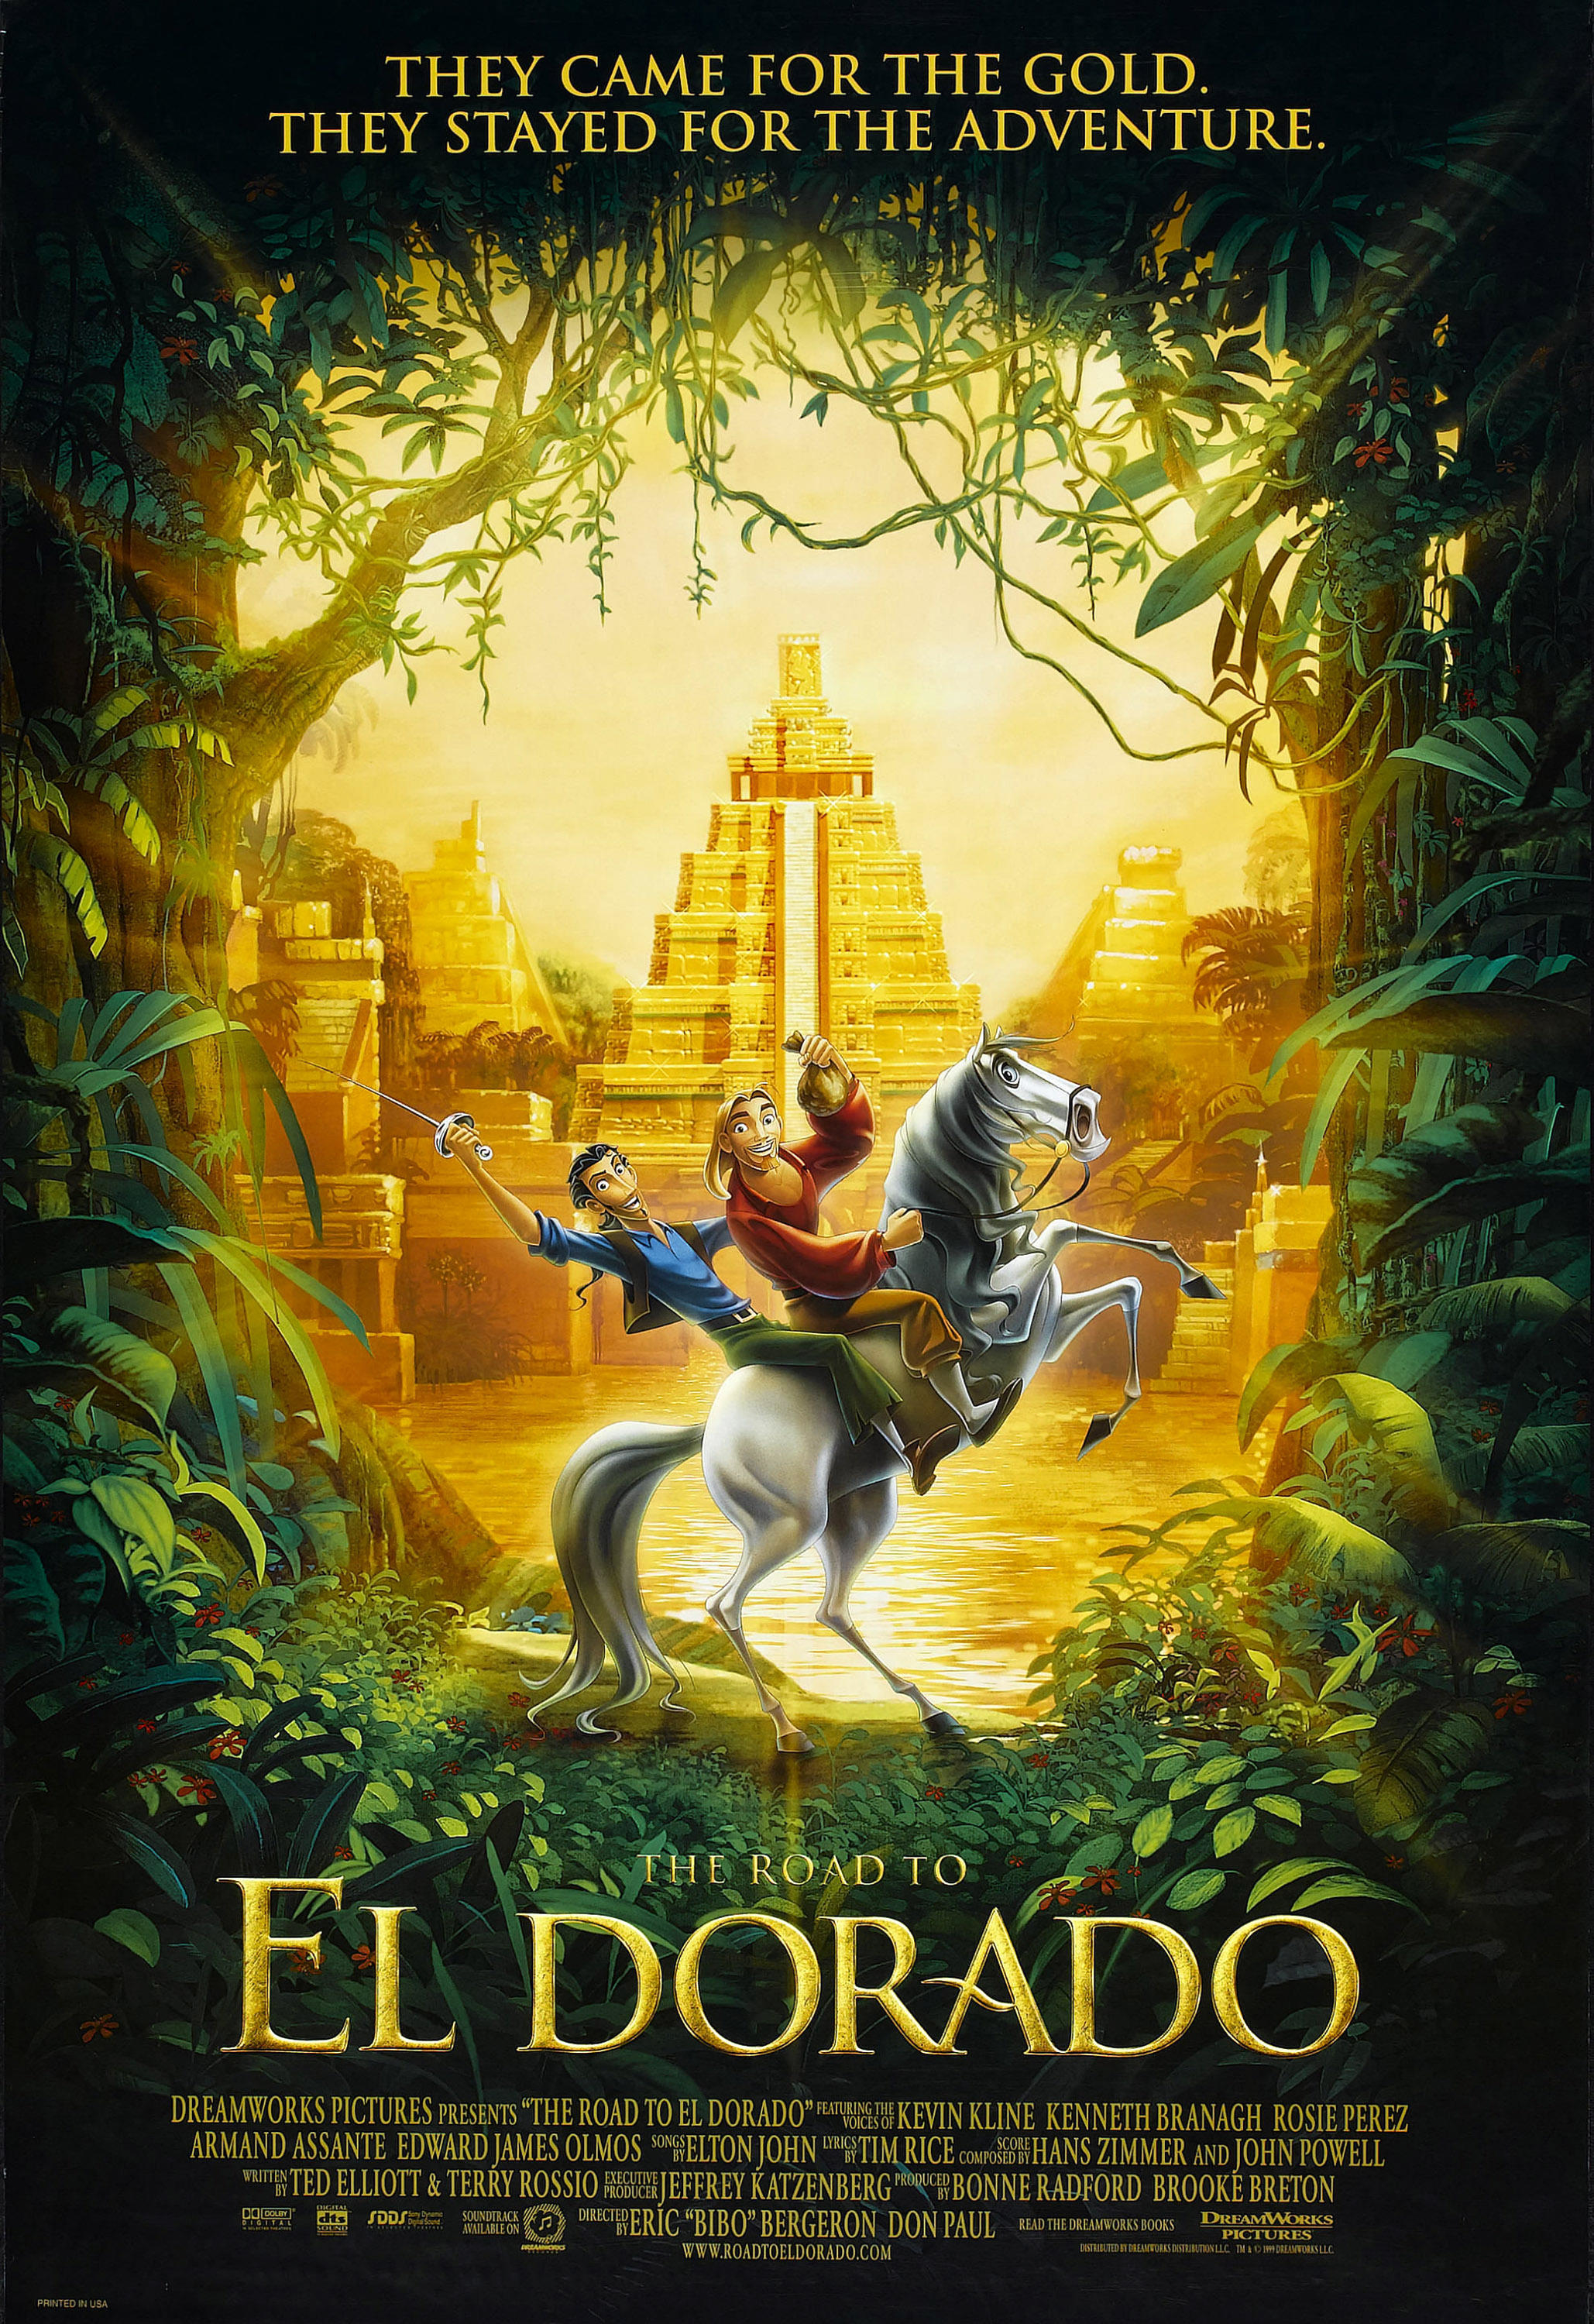 Poster image for the animated film The Road to El Dorado featuring the two main characters on a white horse in front of a city of gold.